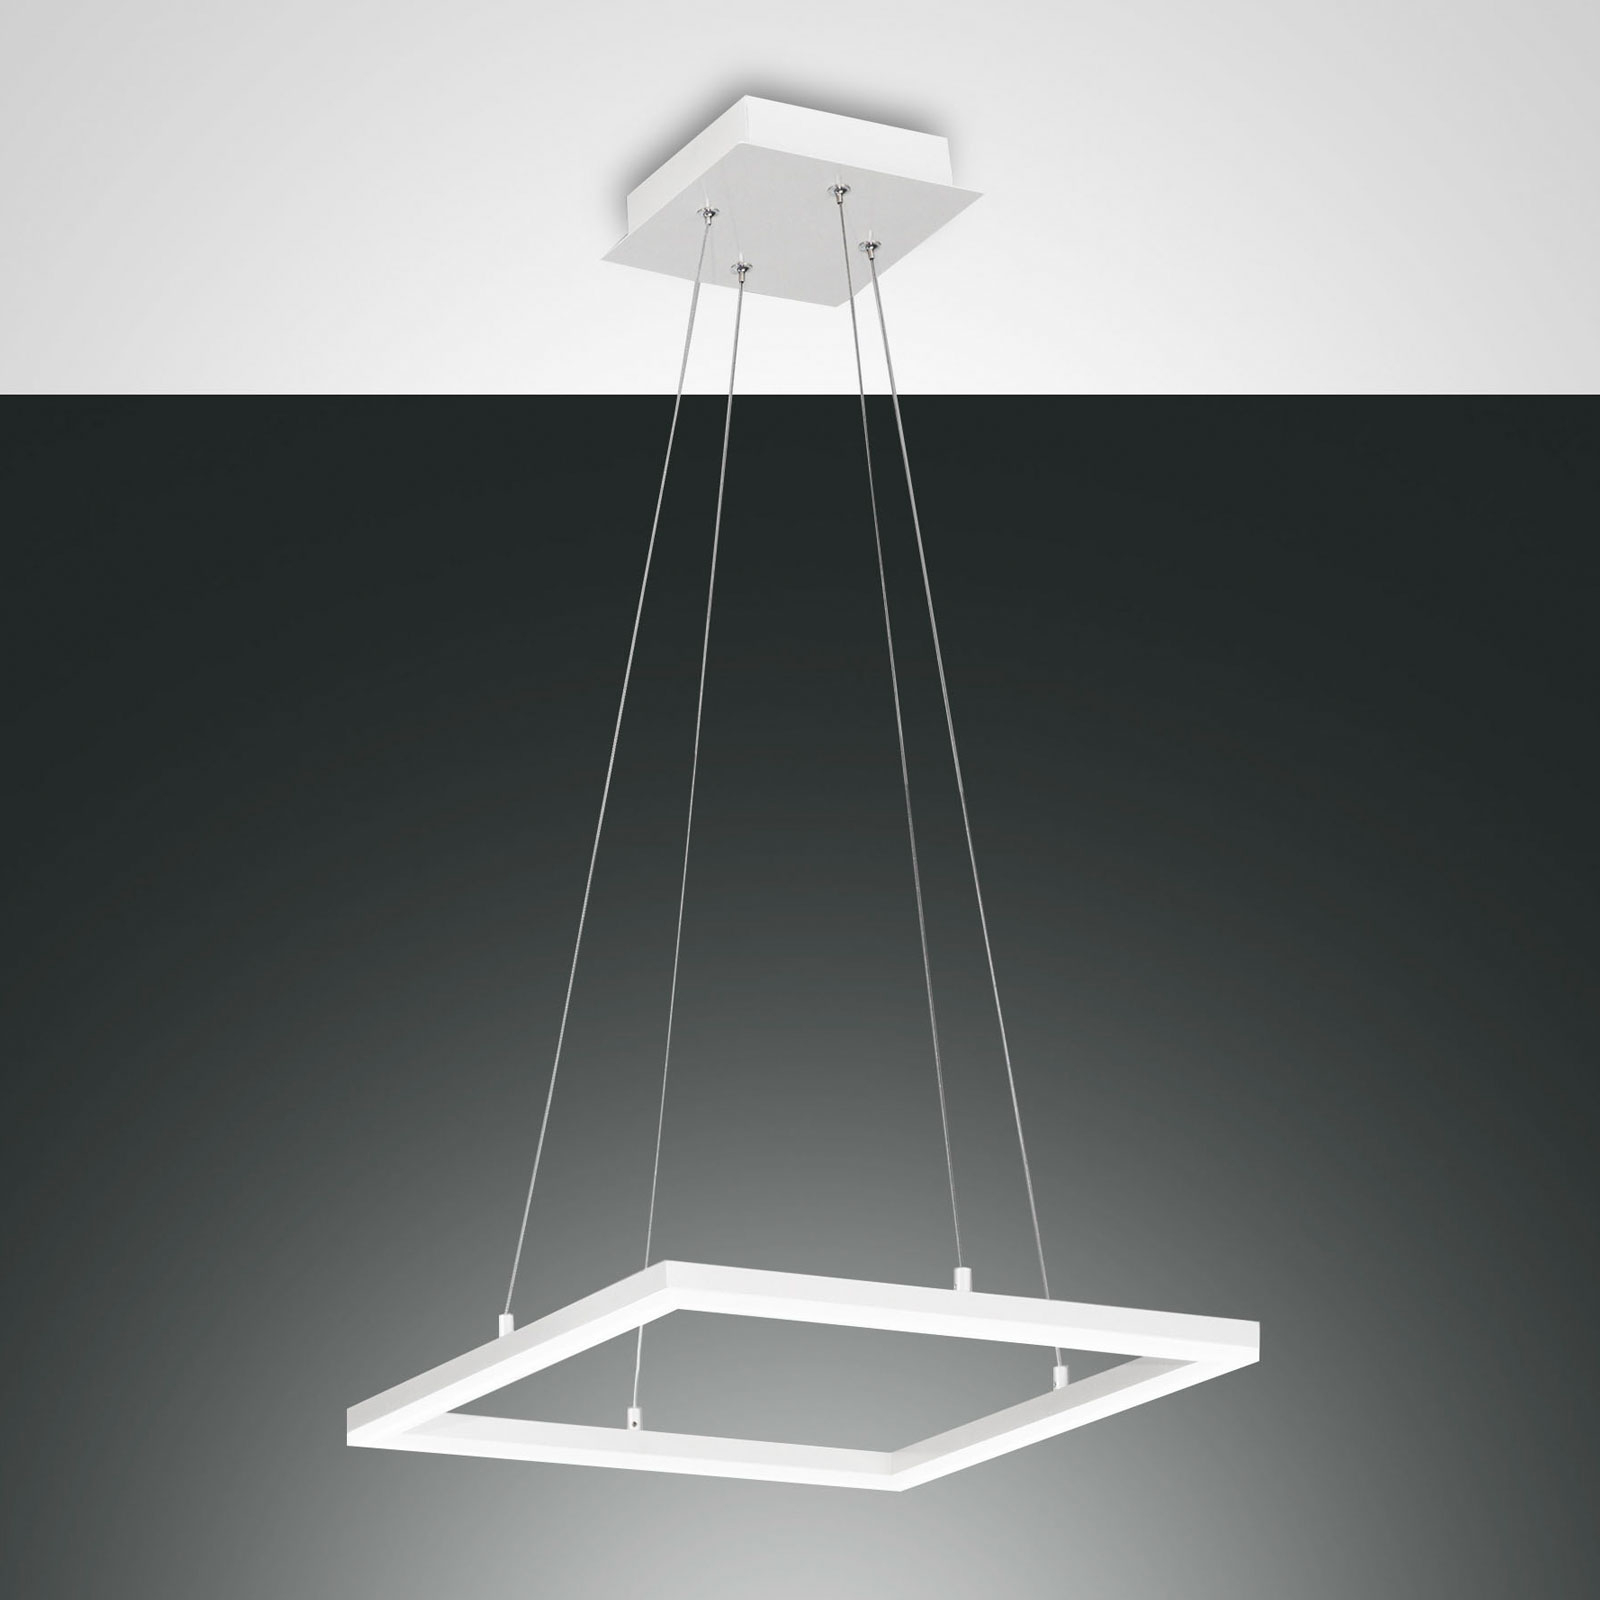 LED hanglamp Bard, 42x42cm in wit